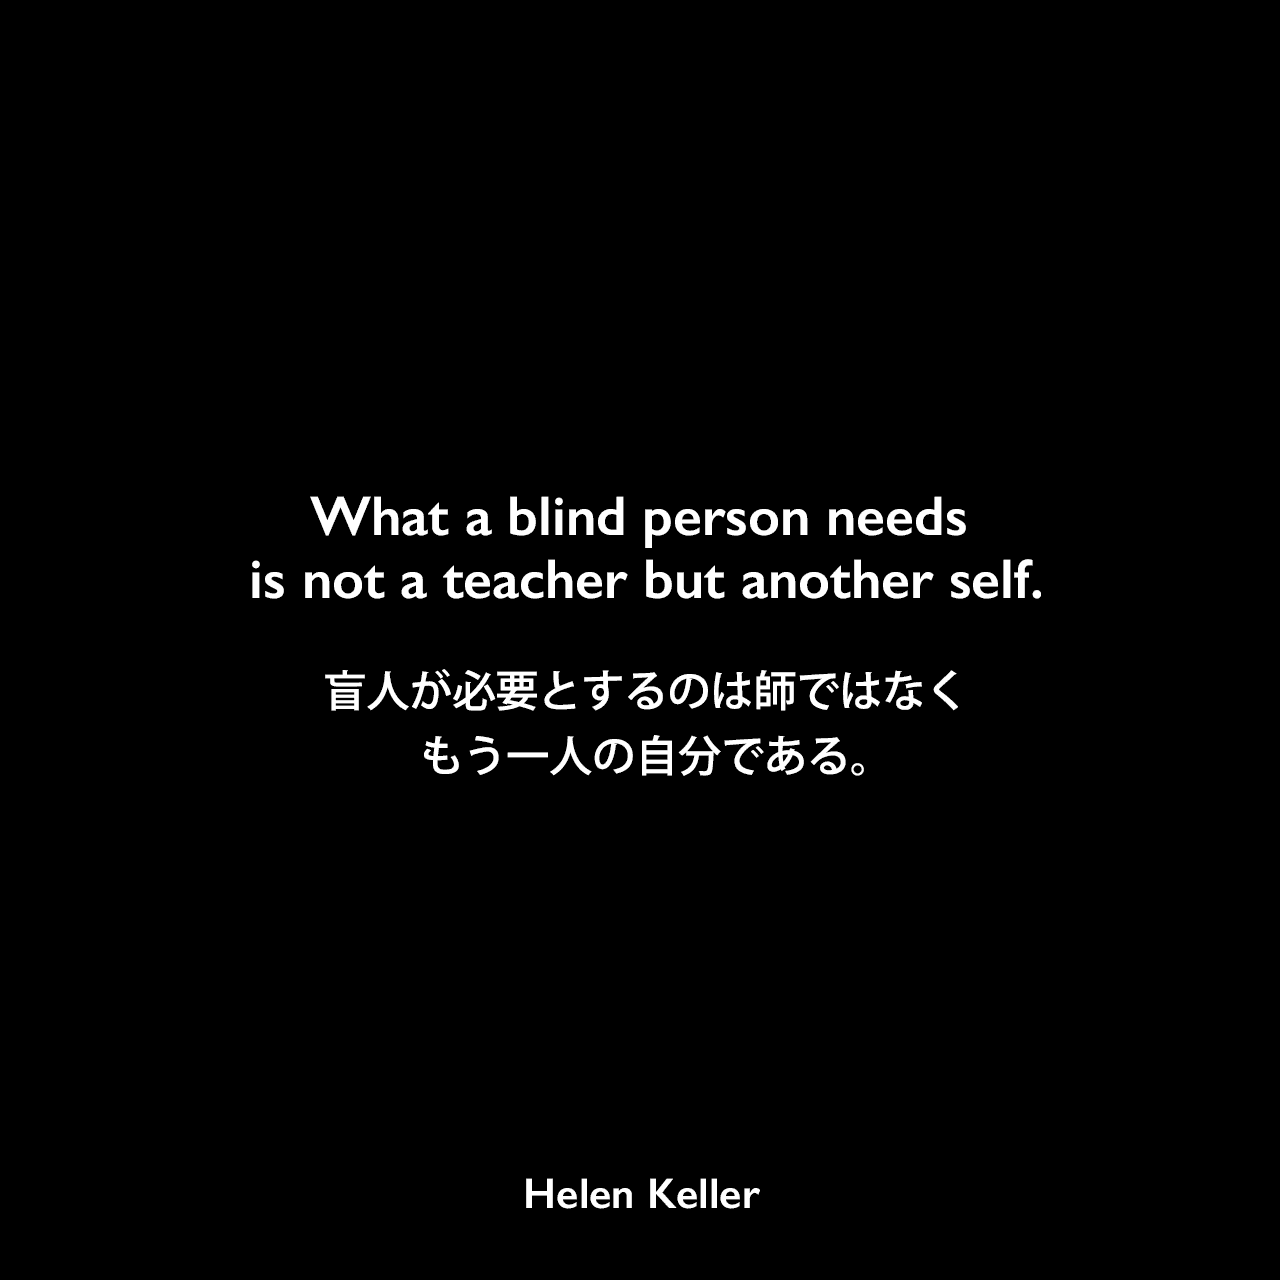 What a blind person needs is not a teacher but another self.盲人が必要とするのは師ではなく、もう一人の自分である。Helen Keller